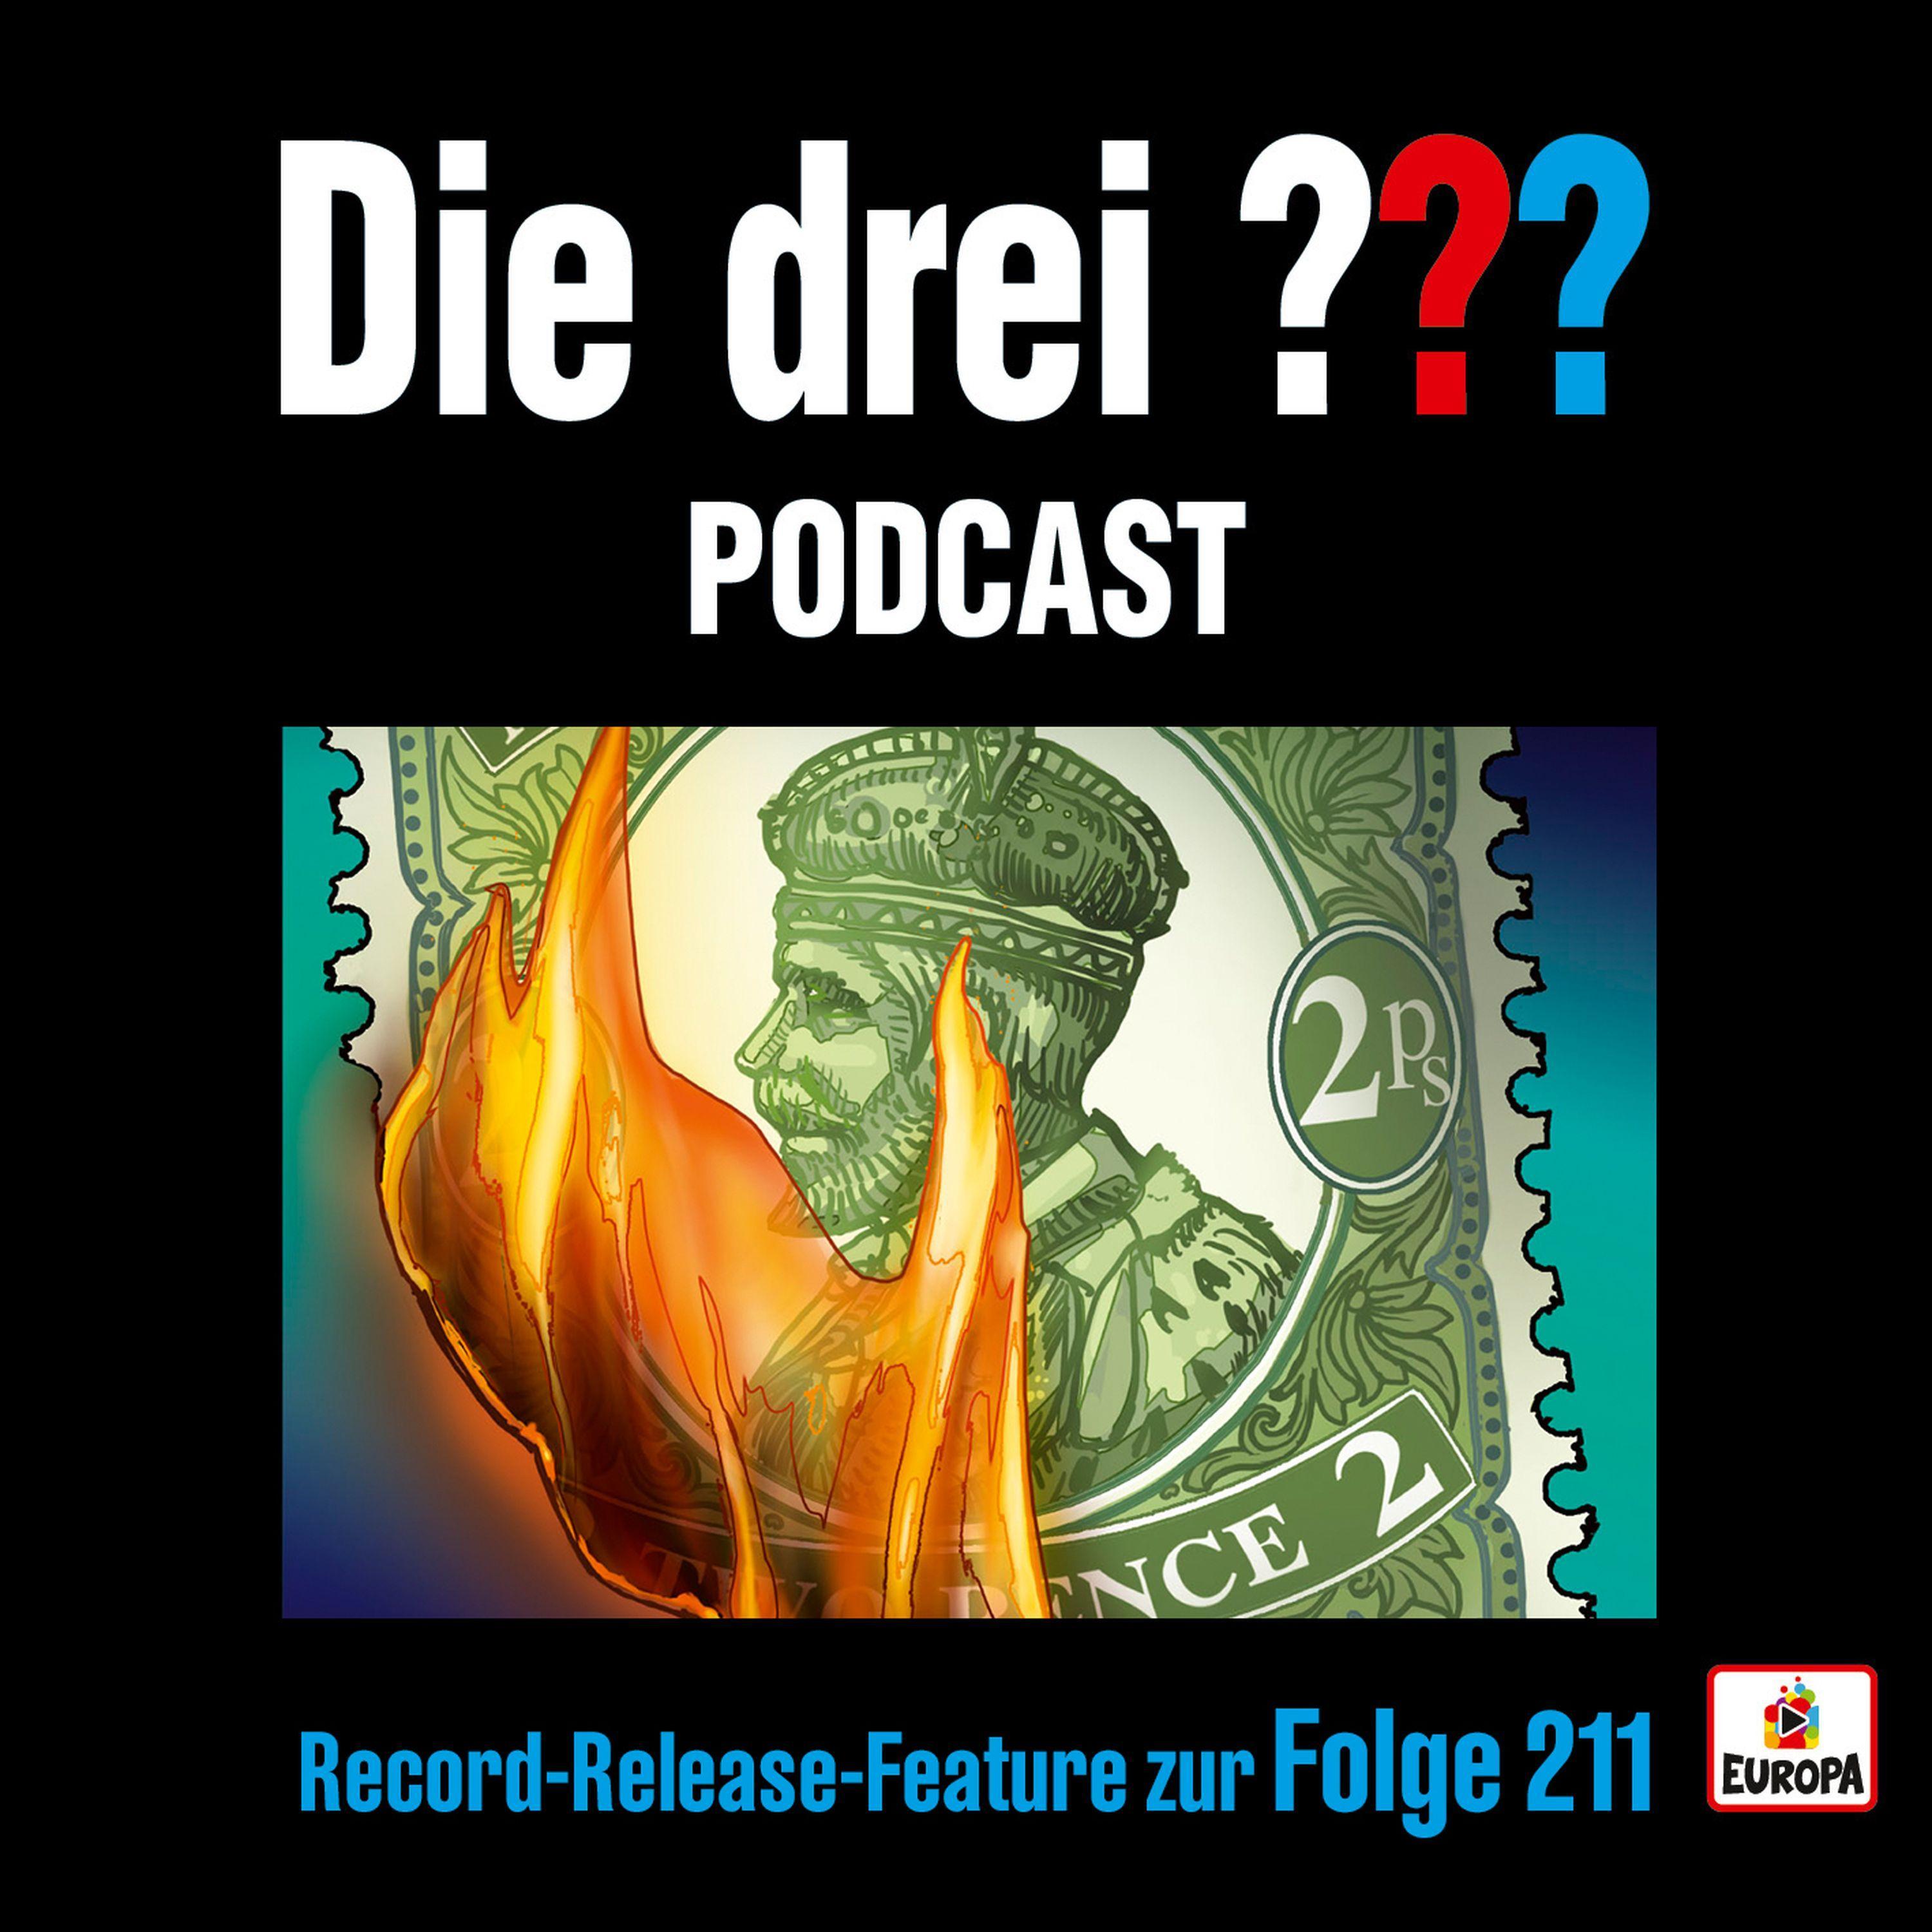 Record-Release-Feature zur Folge 211